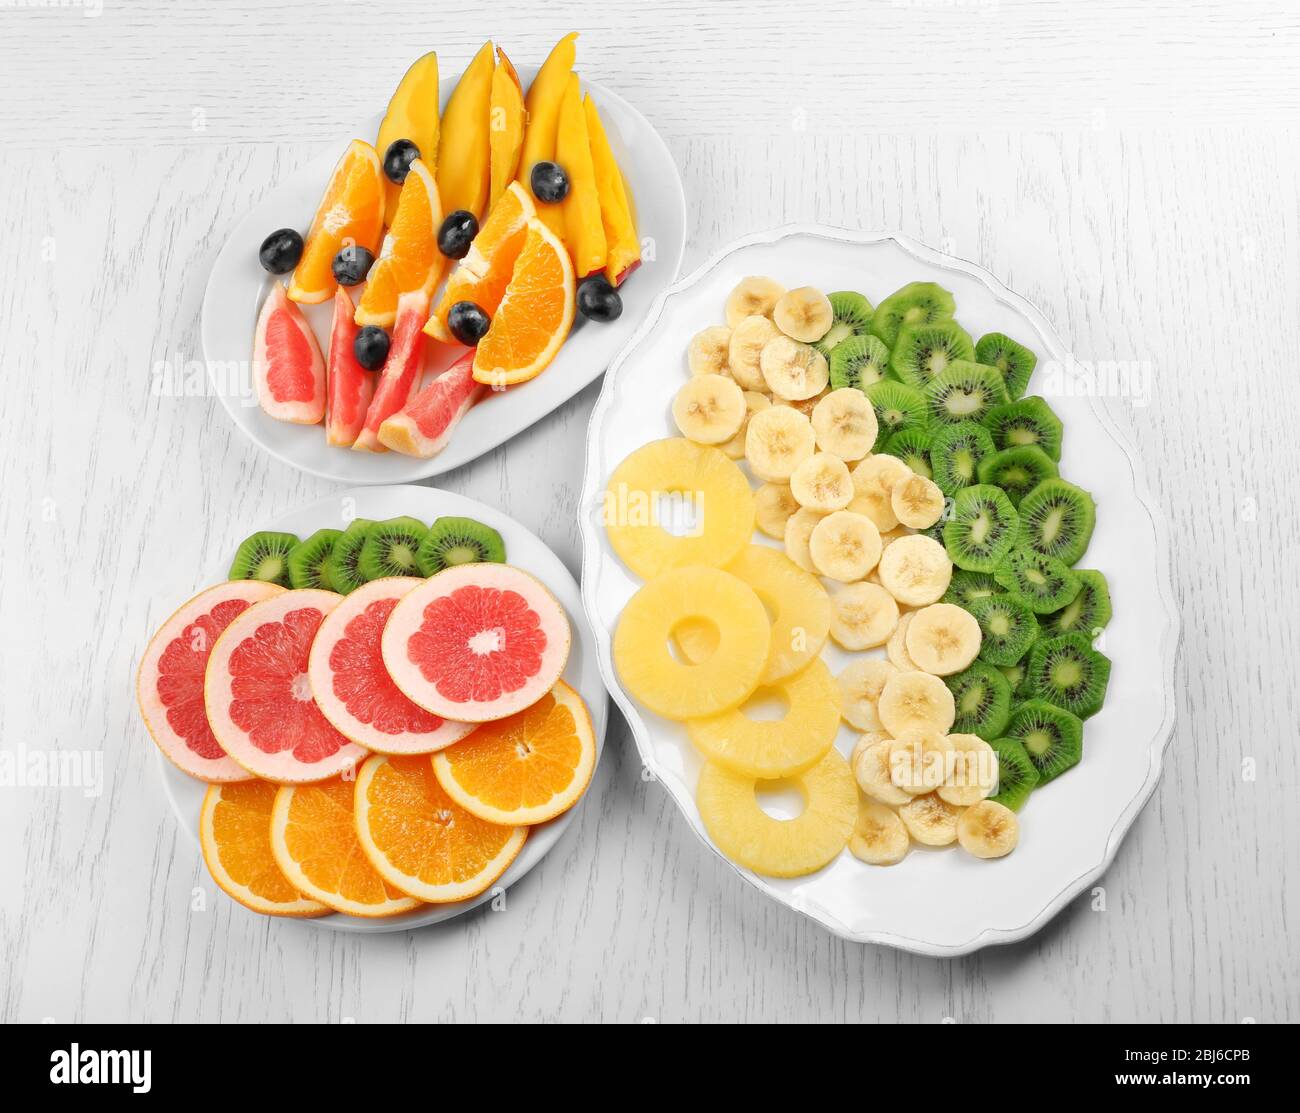 Fruits and vegetables on light wooden background. healthy eating concept. Stock Photo